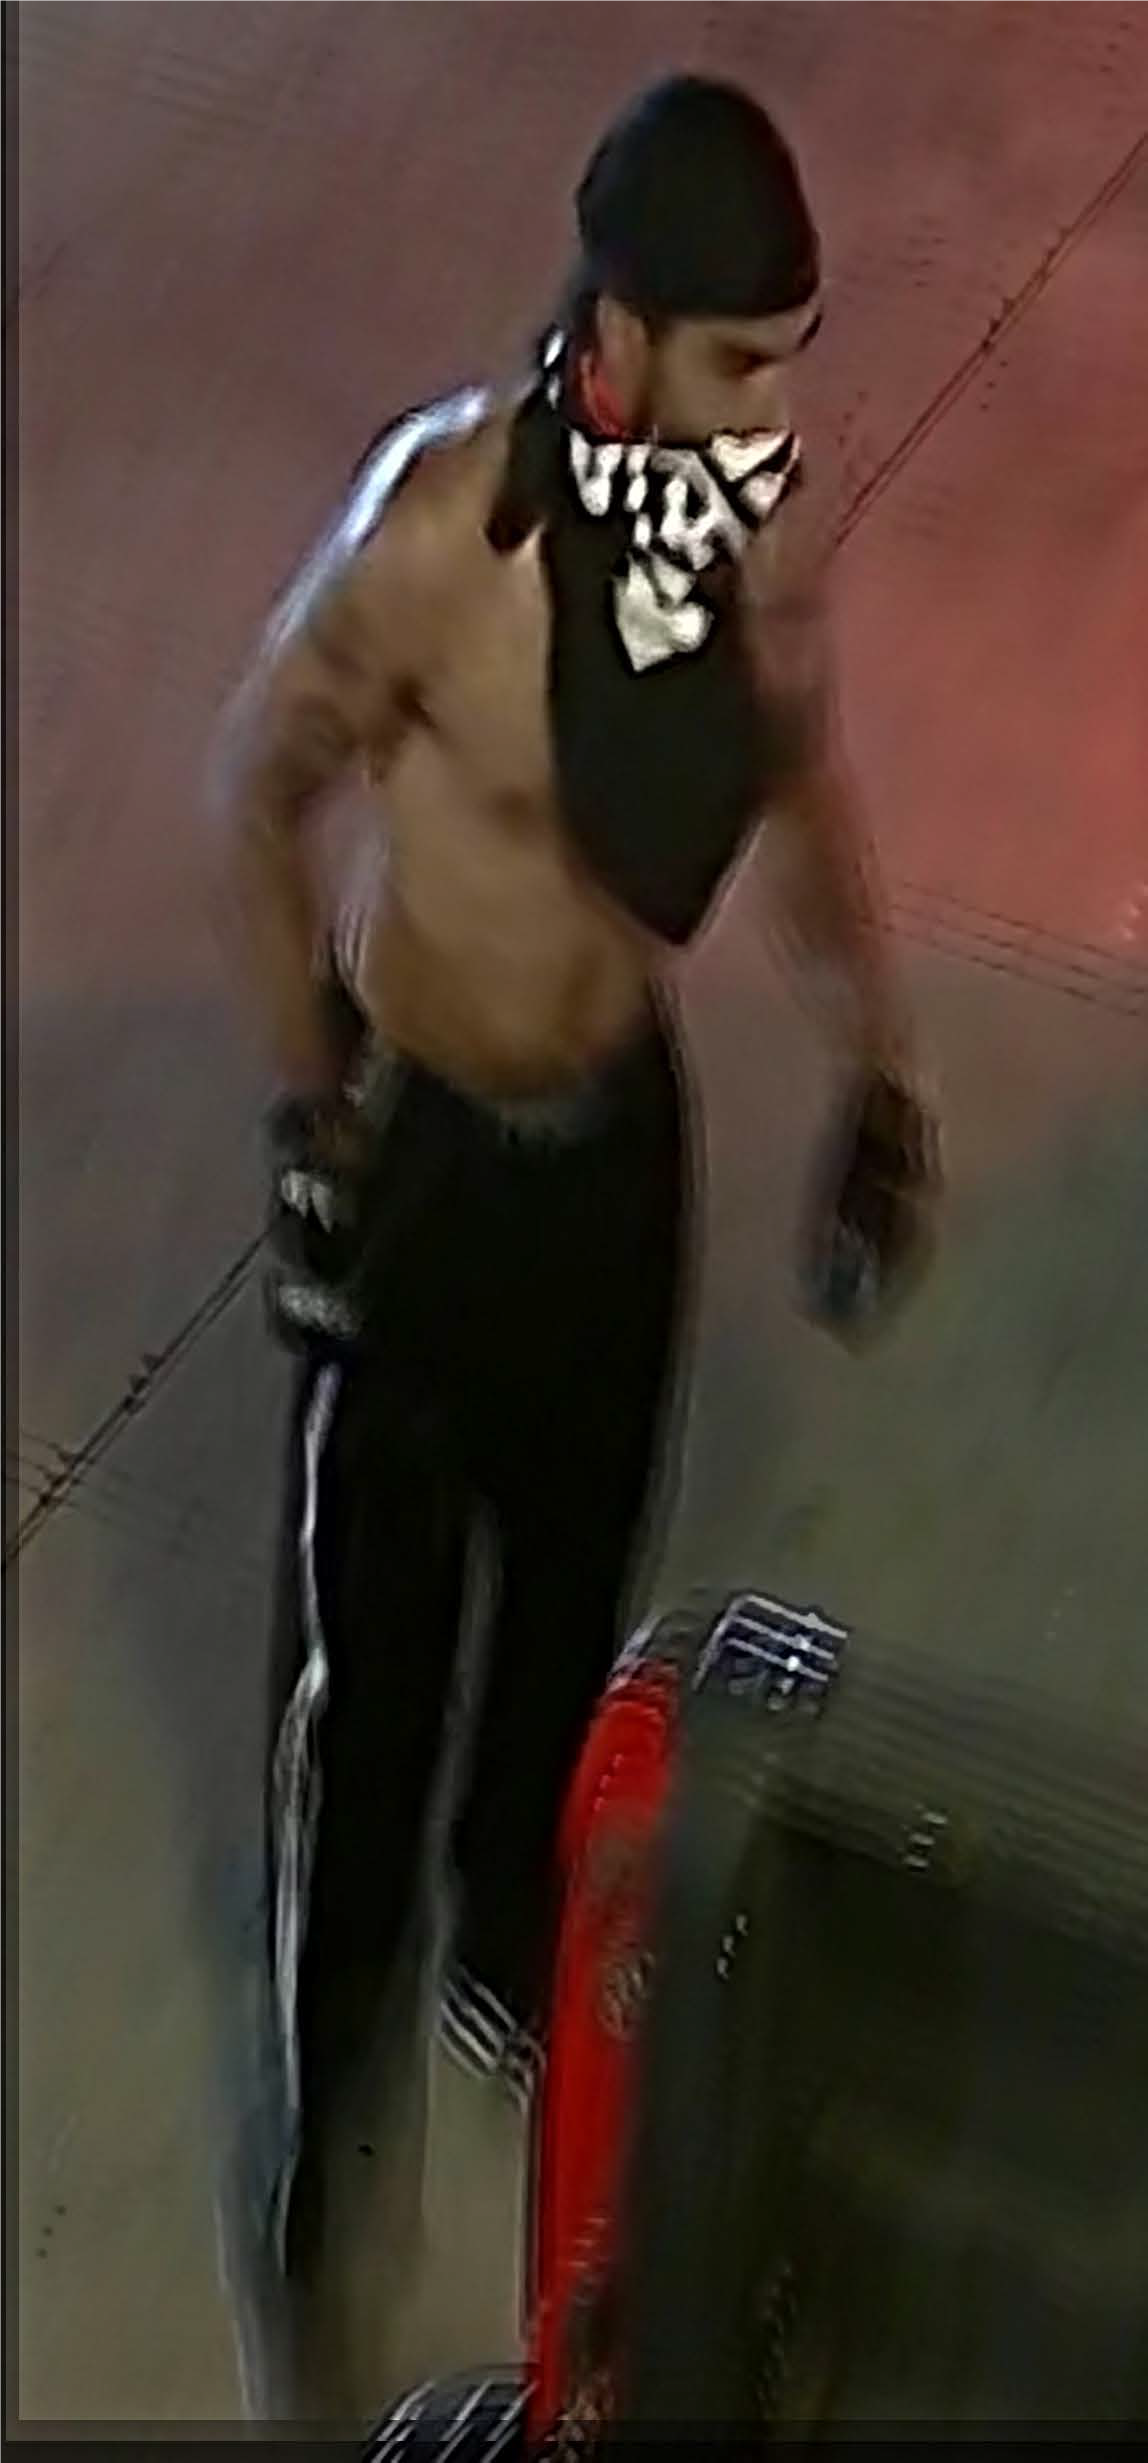 Male with no shirt, black pants, black hat and black t-shirt tied around the lower half of his face, identified as UNSUB #30.